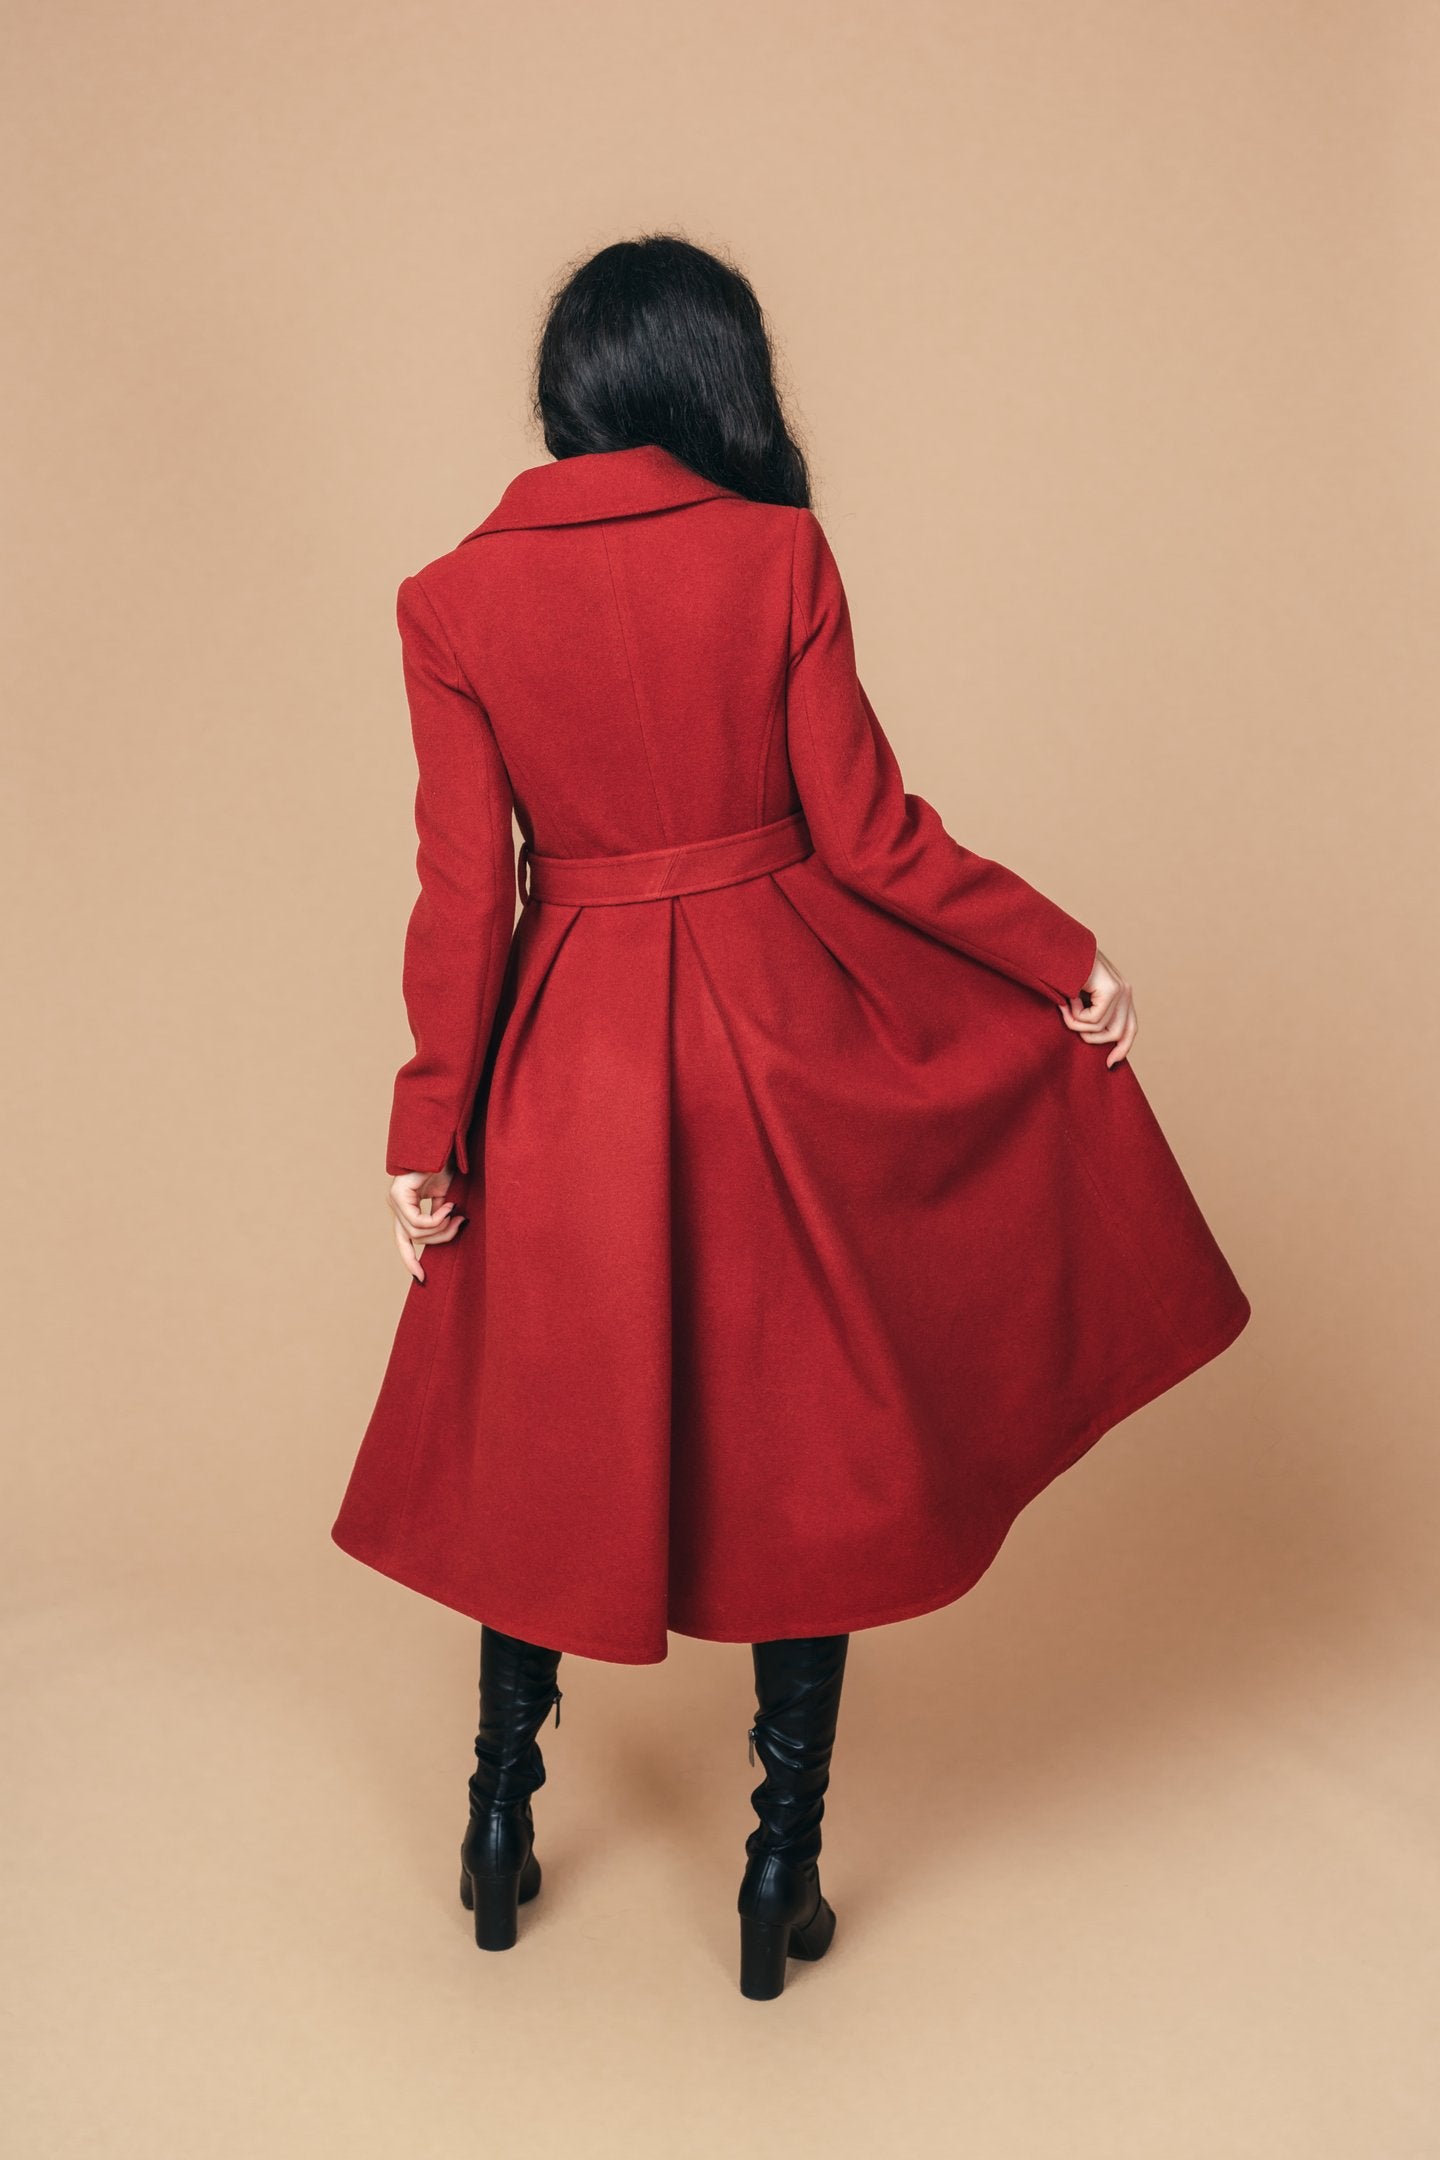 "Sloane" Coat 100% Wool With Lining in Red Brick Colour - back